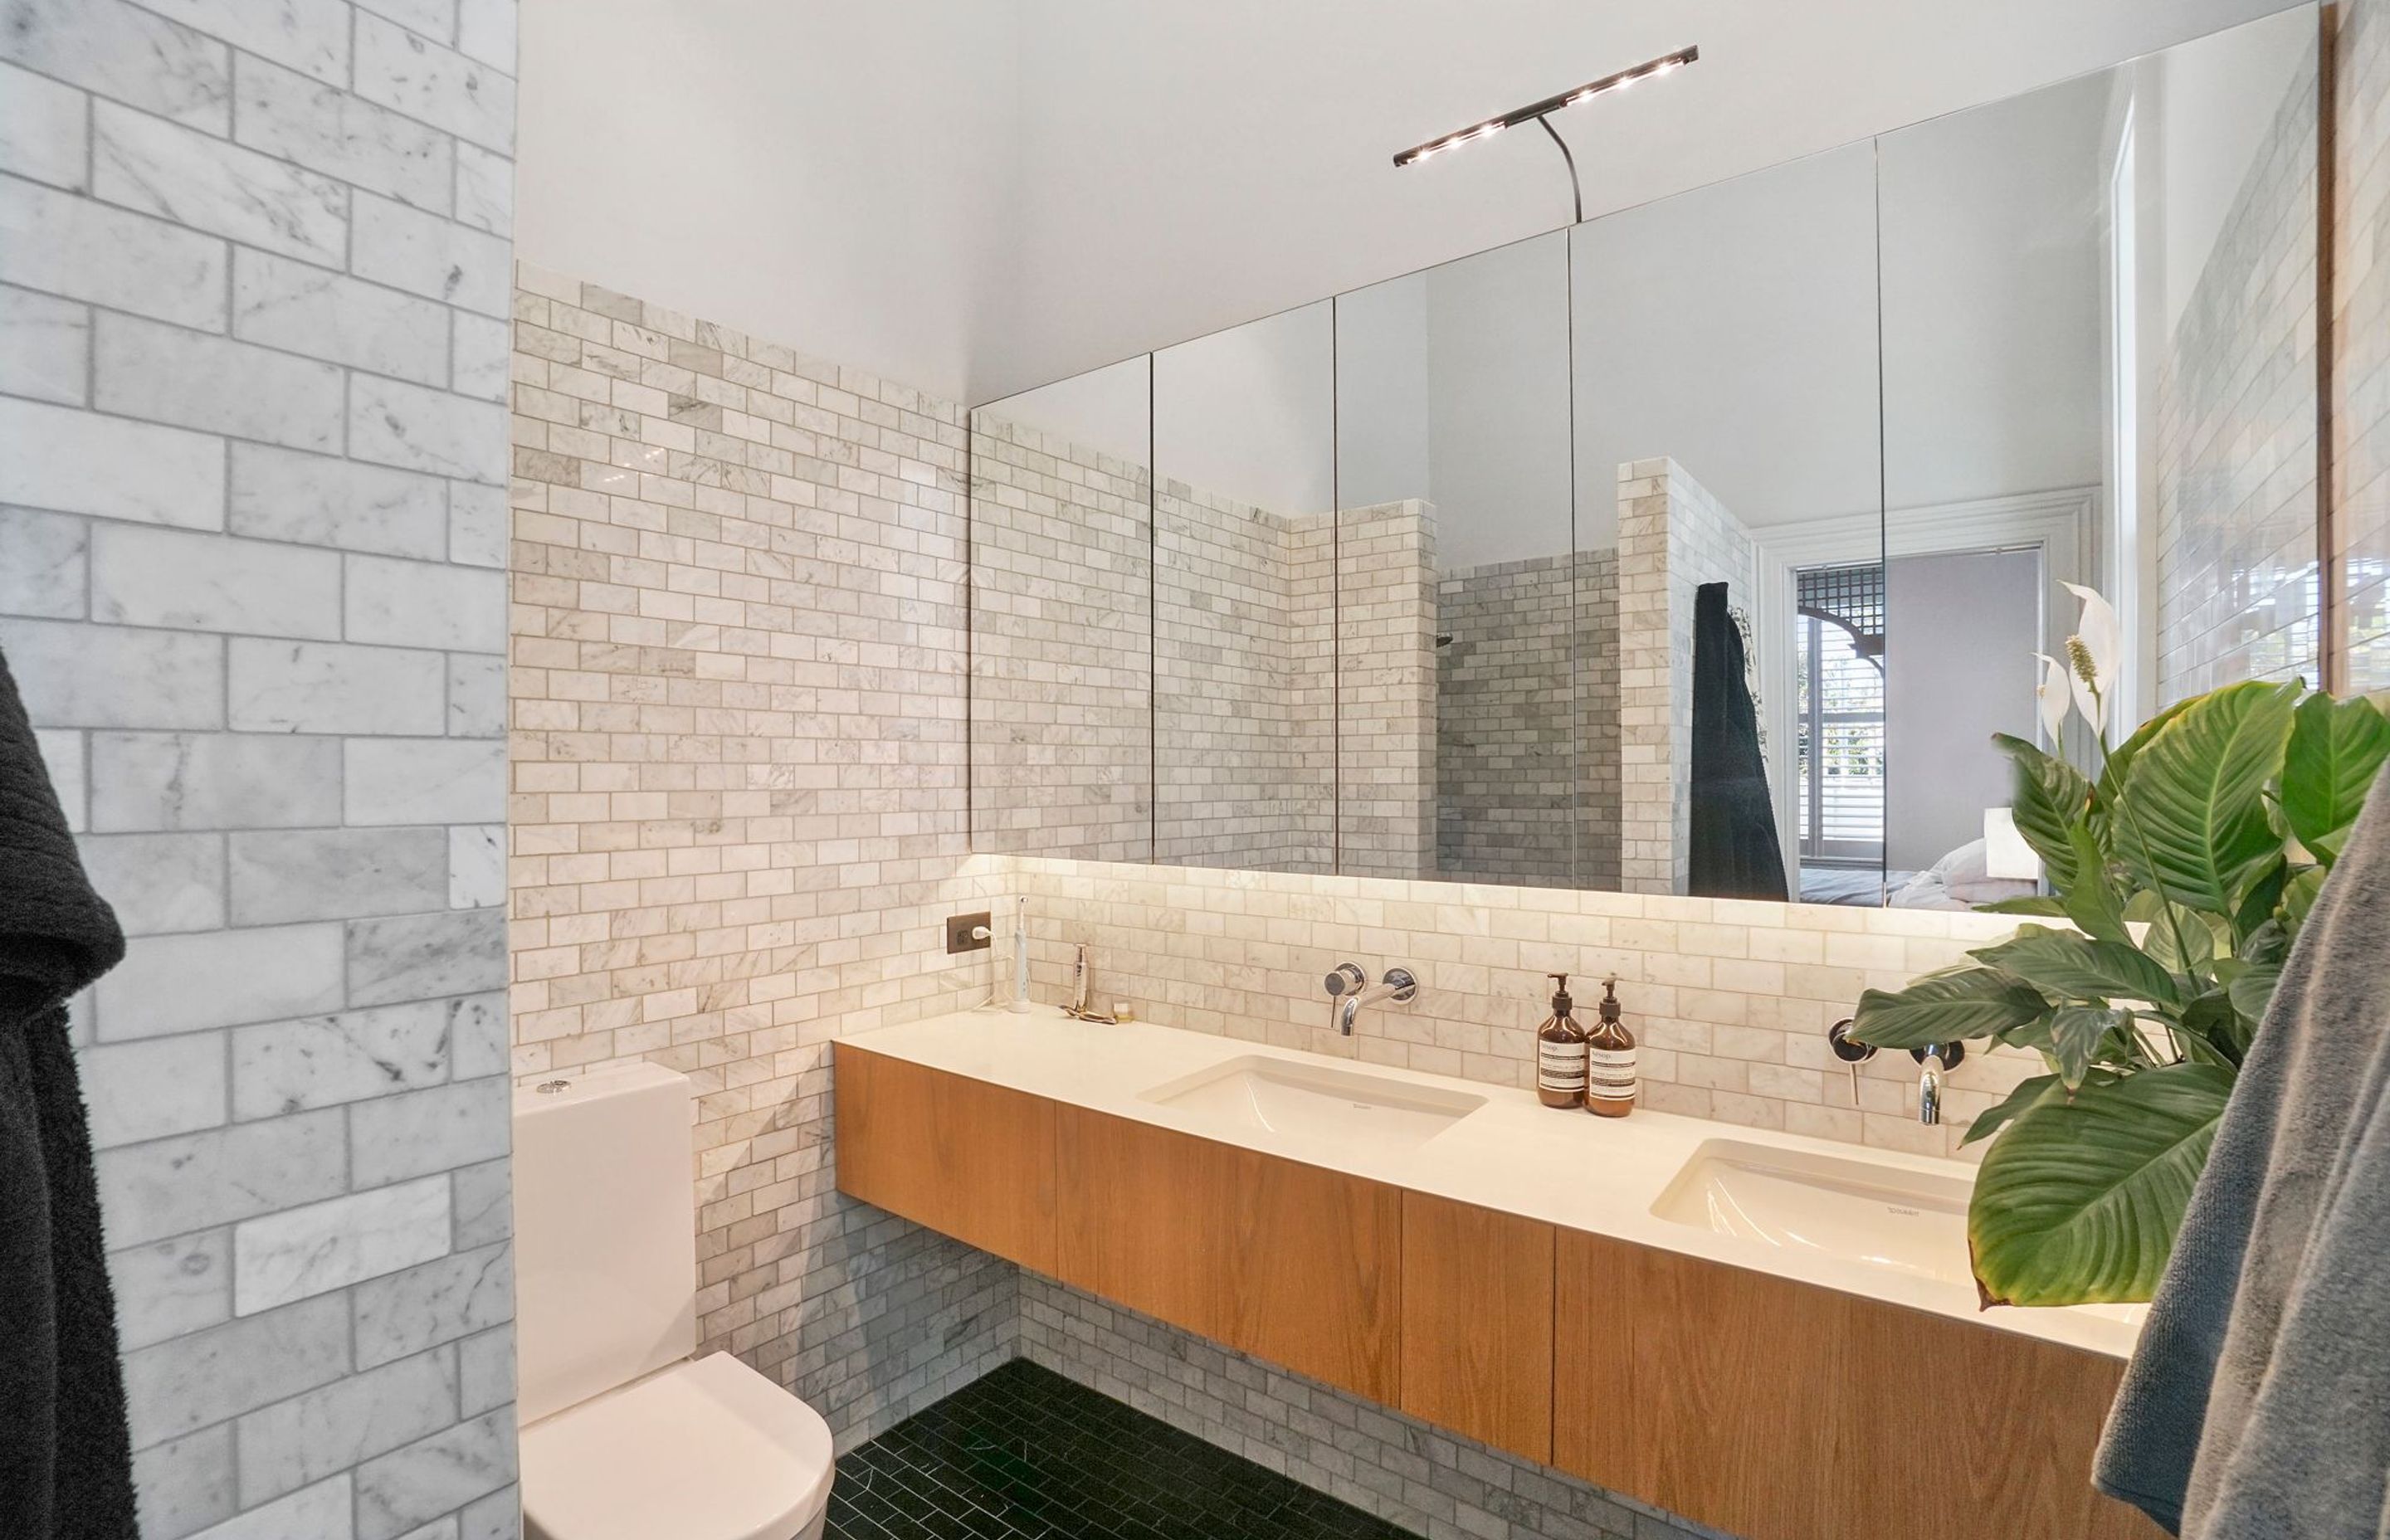 A mixture of sophisticated America Oak and natural stone keep the bathrooms in touch with the rest of the home’s presence and memorable feel.